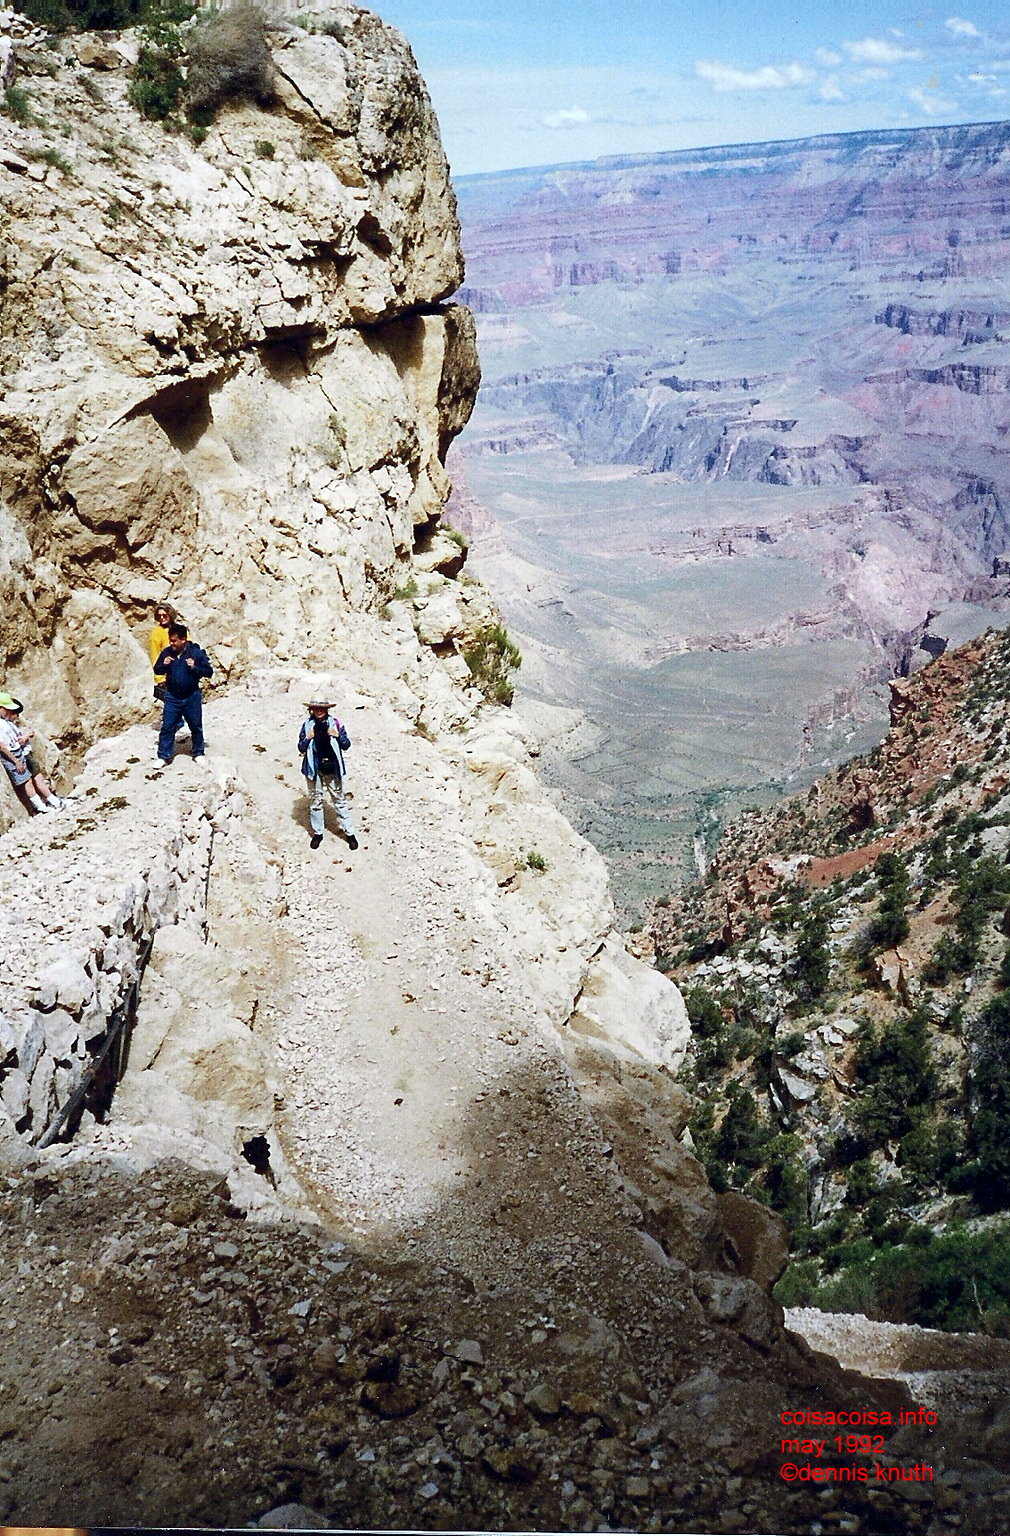 Dennis Knuth, Regina, Helton and Sonja walking down the Grand Canyon